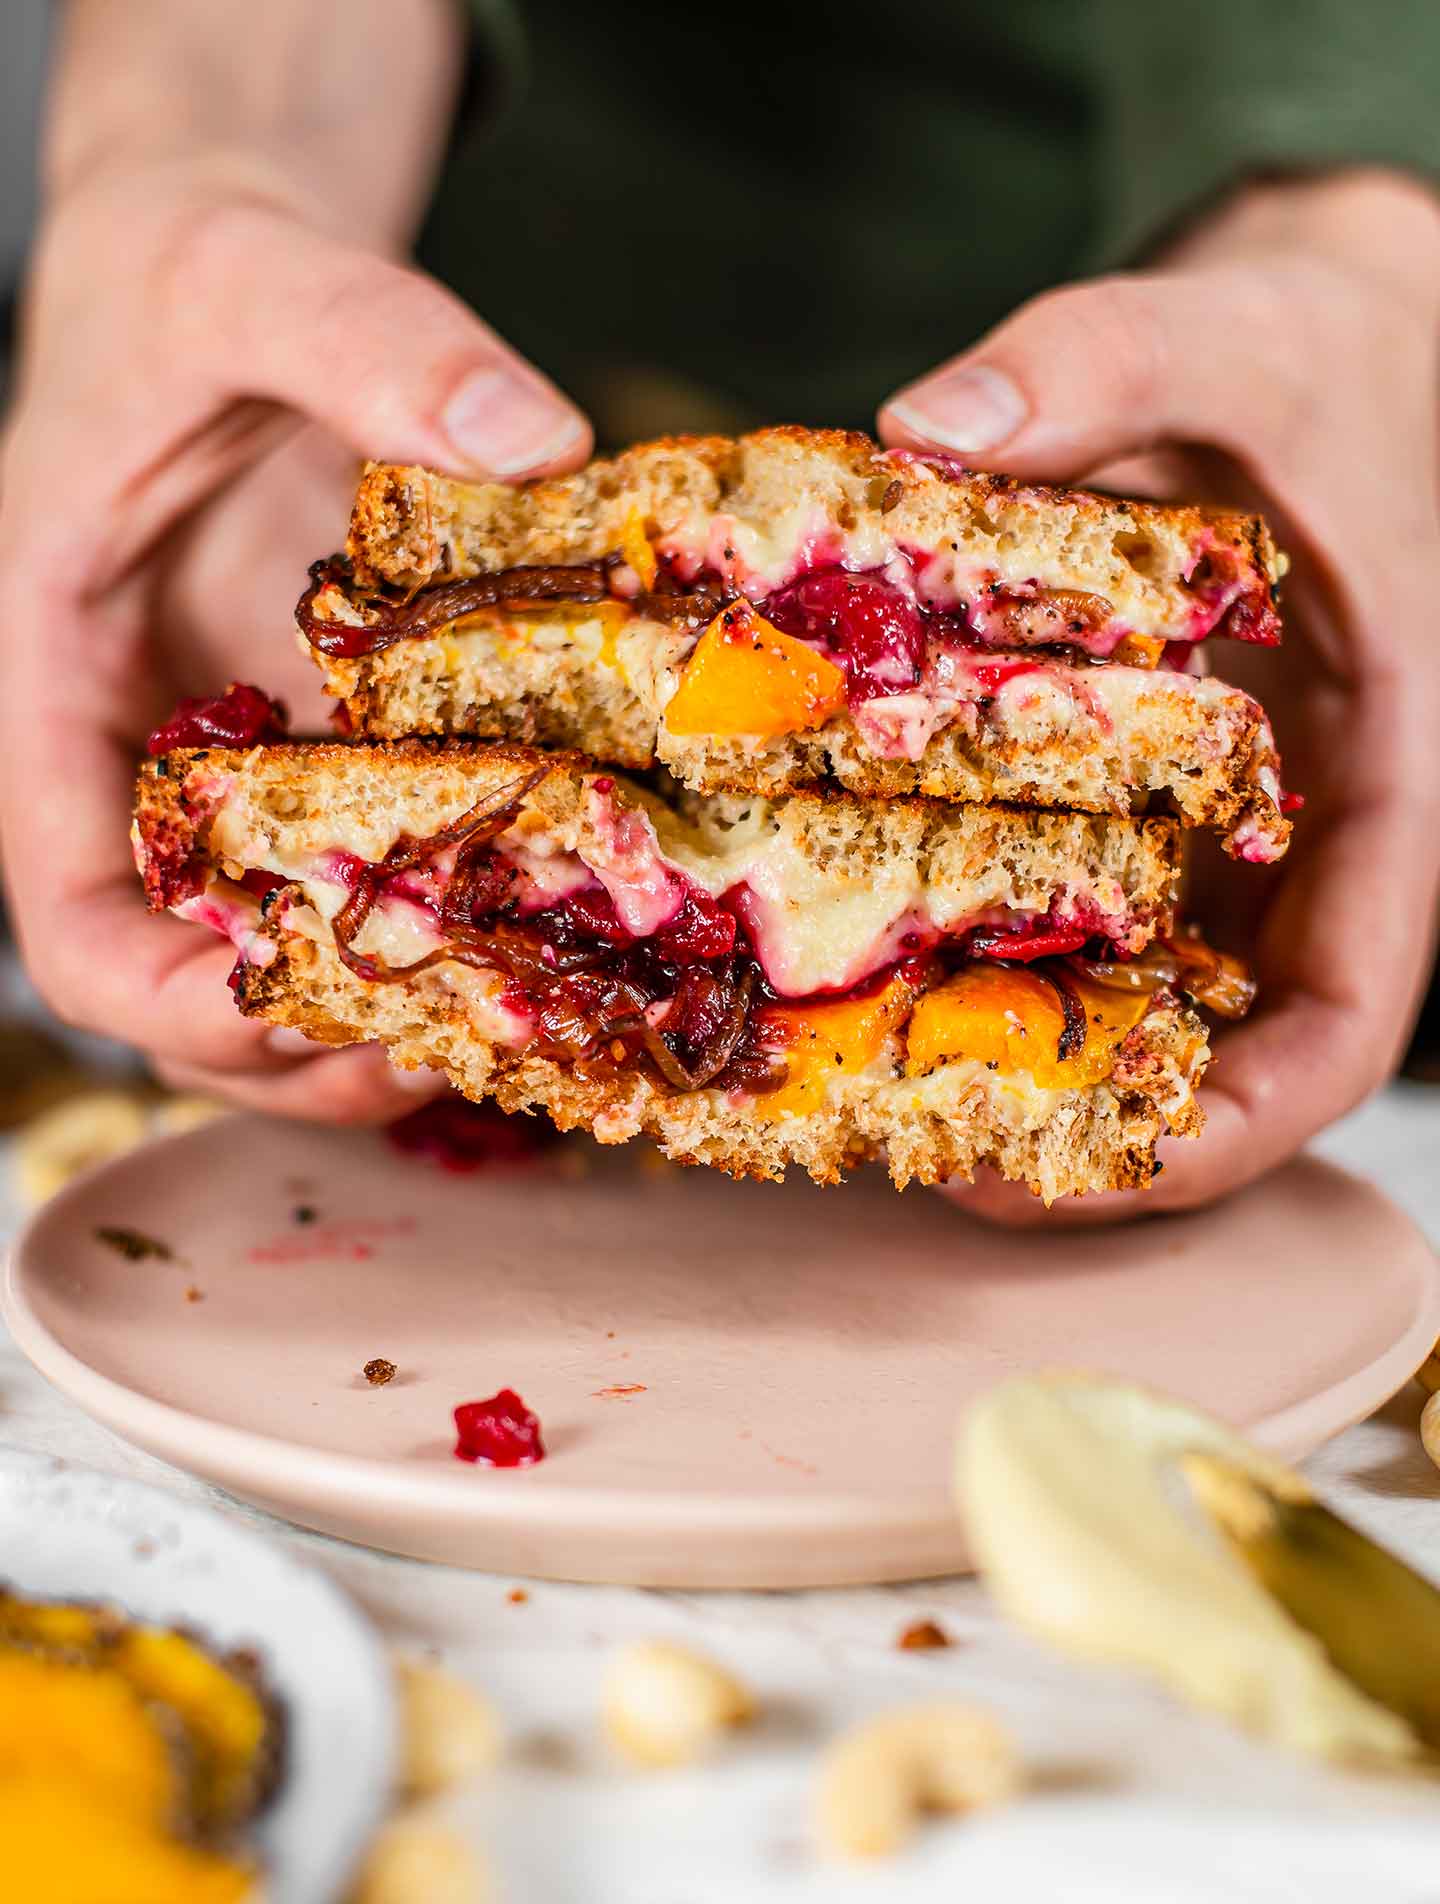 Side view of hands lifting a holiday squash sandwich from a plate. The sandwich has red cranberry sauce, white and gooey mozzarella, and orange roasted squash.